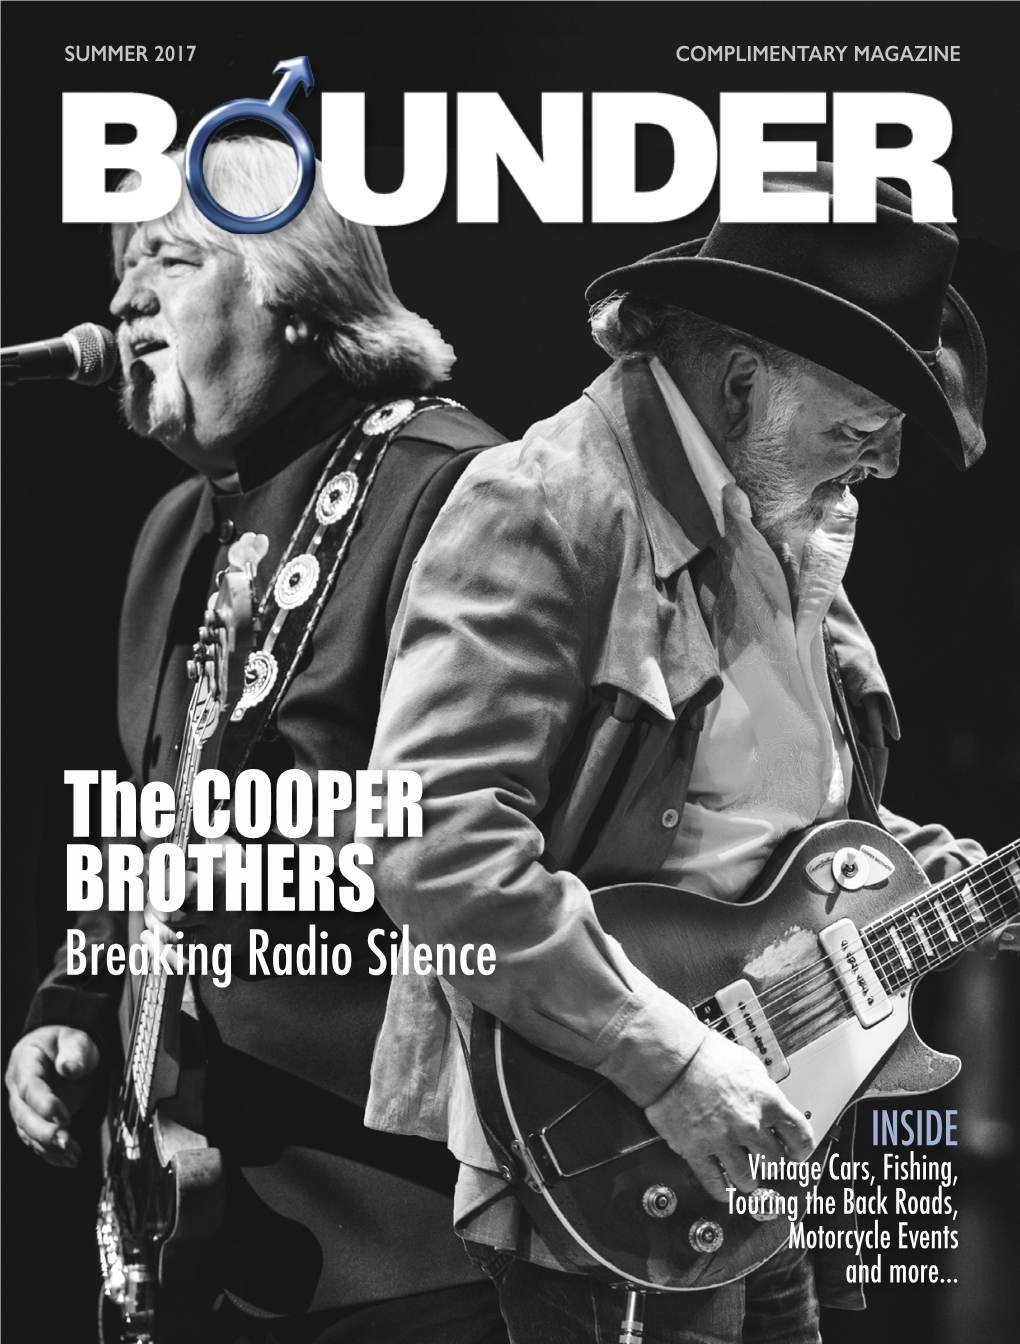 The COOPER BROTHERS Breaking Radio Silence